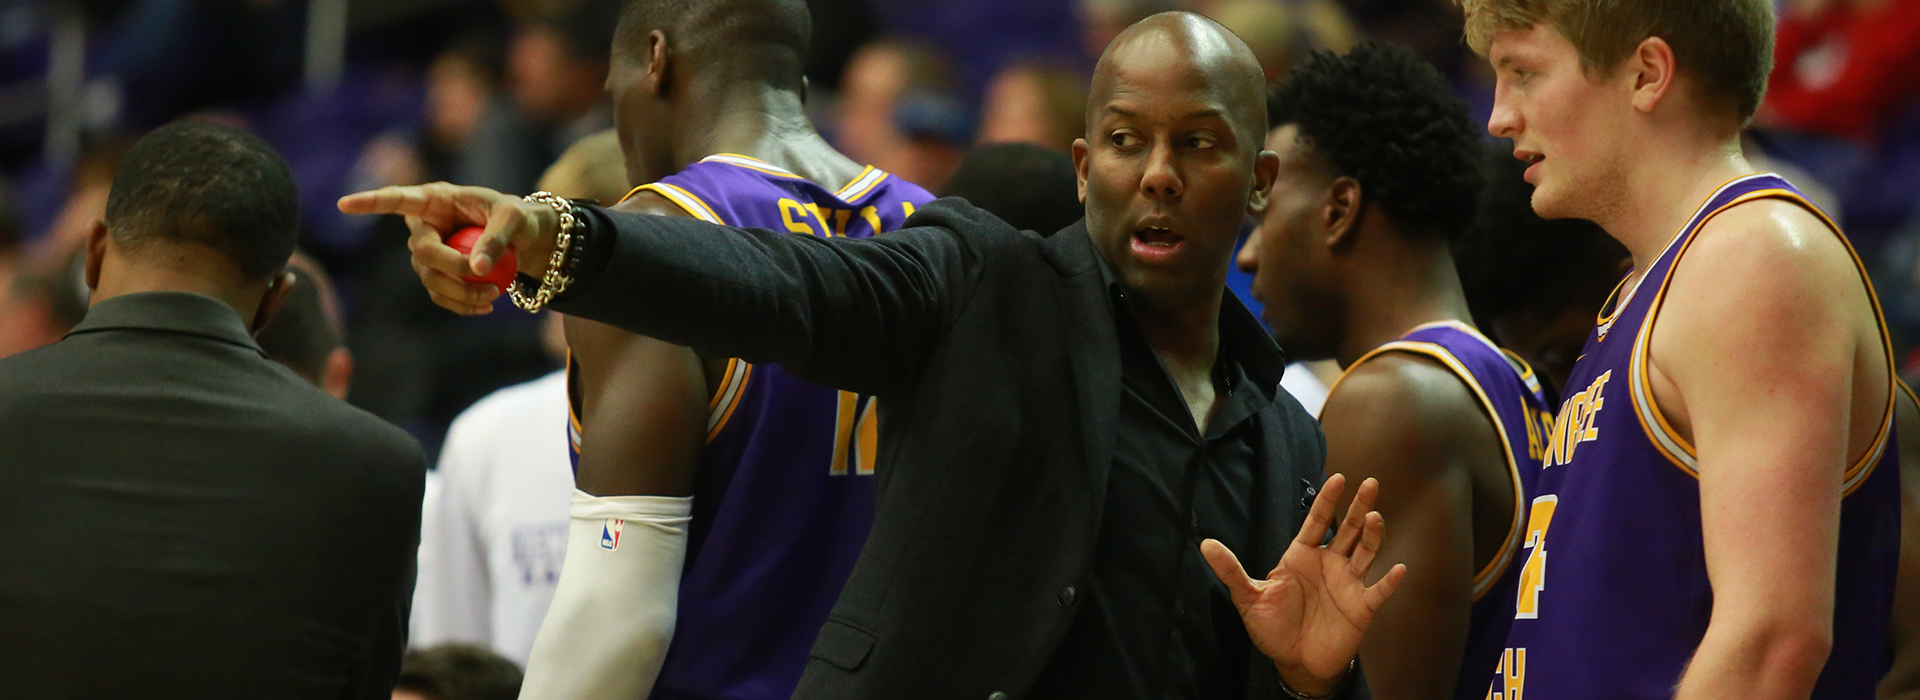 Tech men's basketball's Marcus King promoted to associate head coach